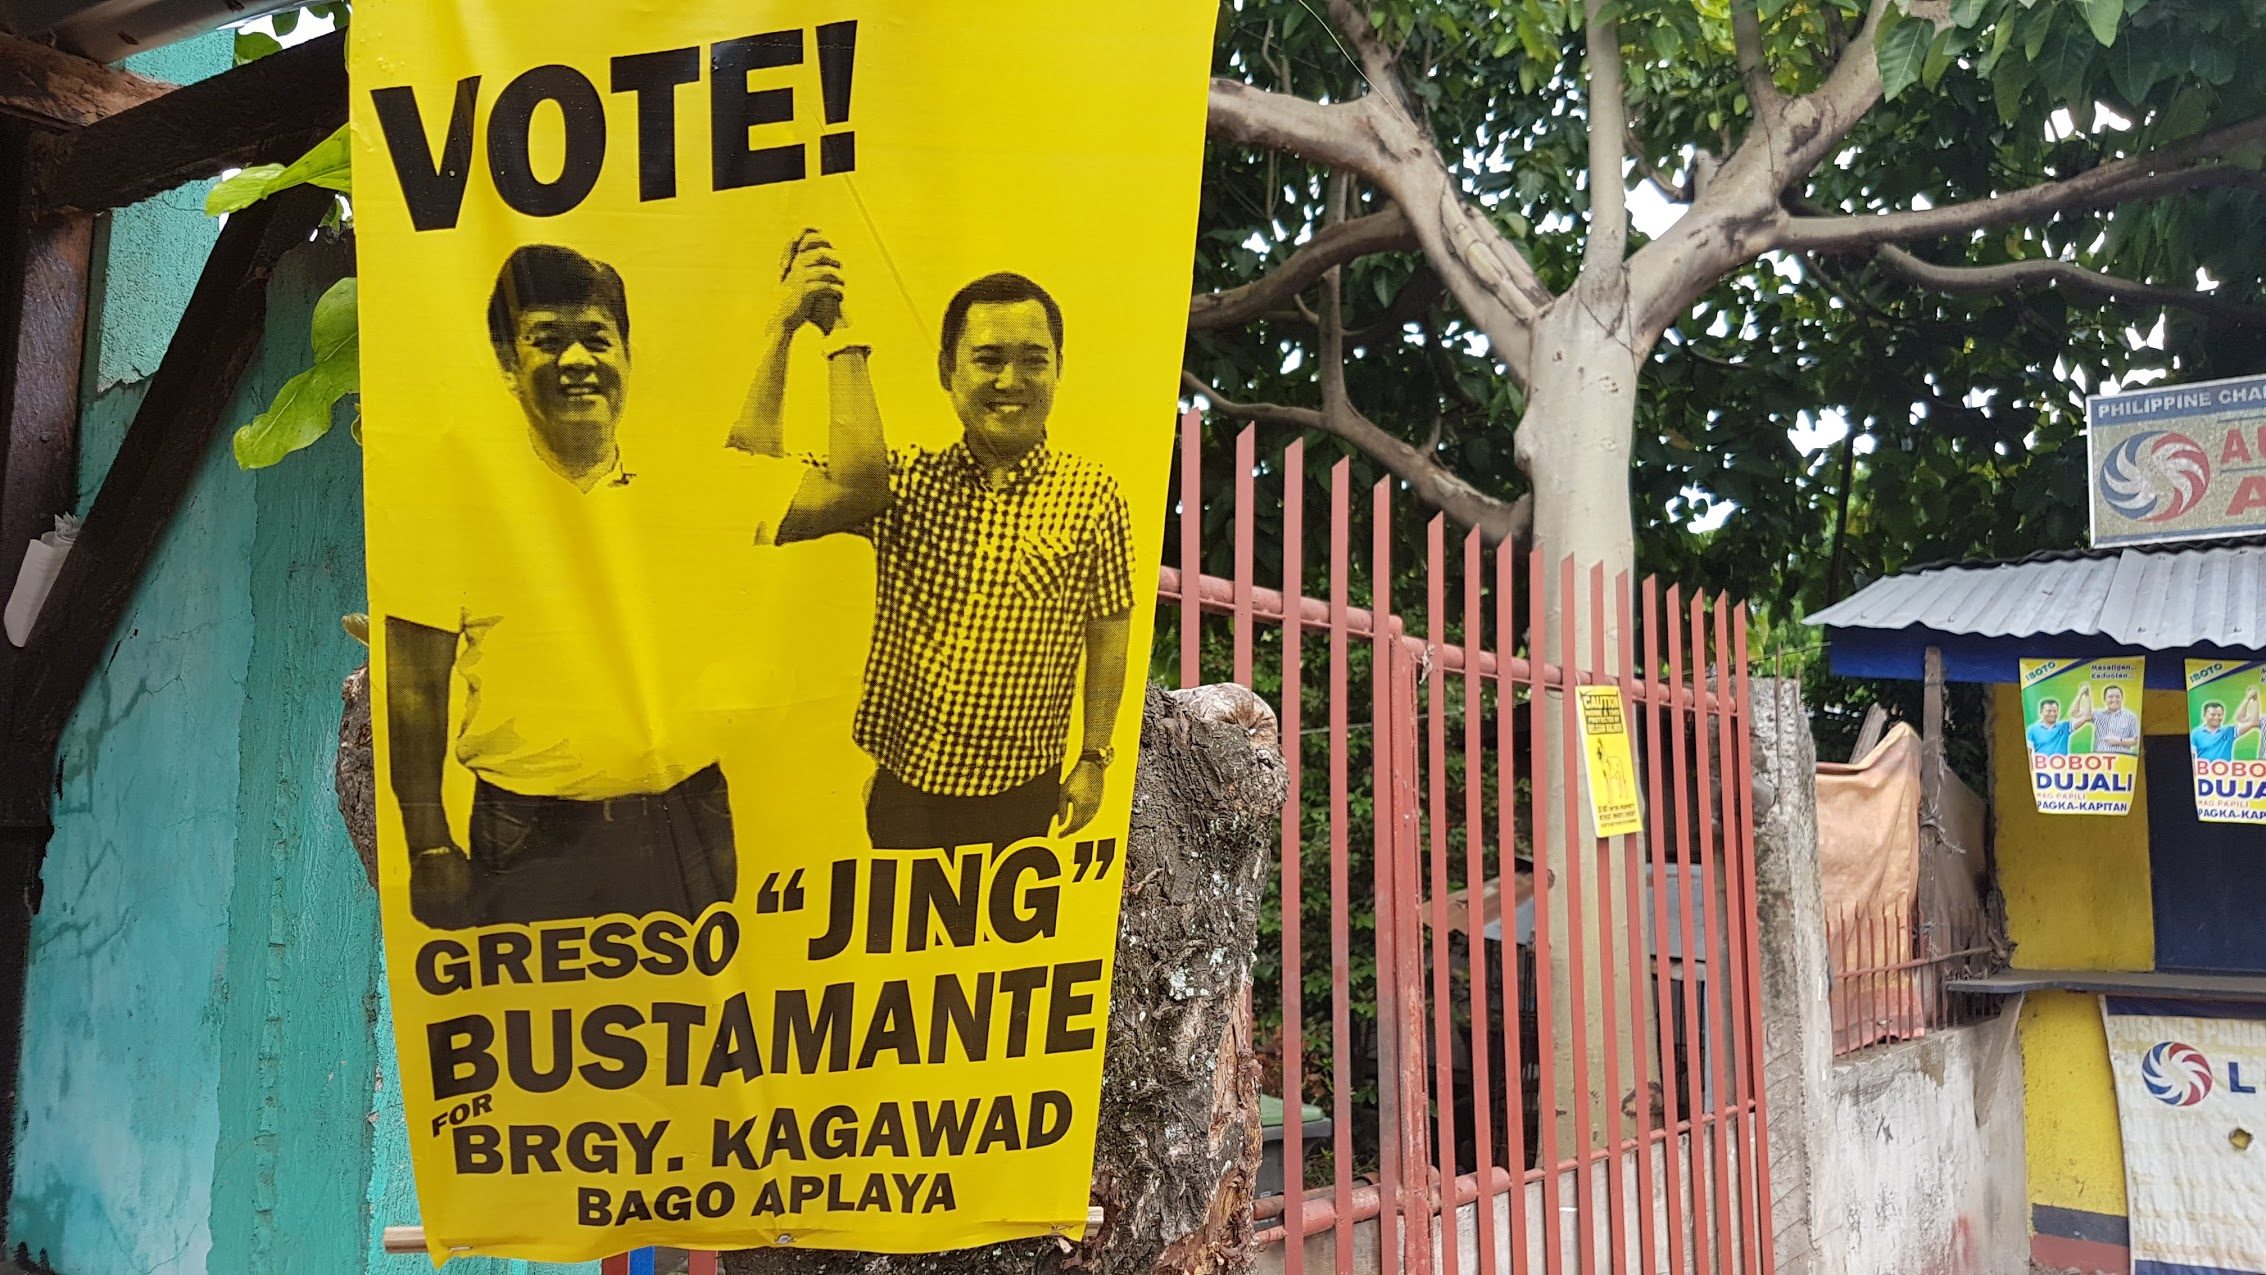 NOGRALES ENDORSEMENT? Bago Aplaya candidate Gresso 'Jing' Bustamante  shown with PBA Partylist Representative Jericho Nograles in his campaign posters. Photo by Mick Basa/Rappler  